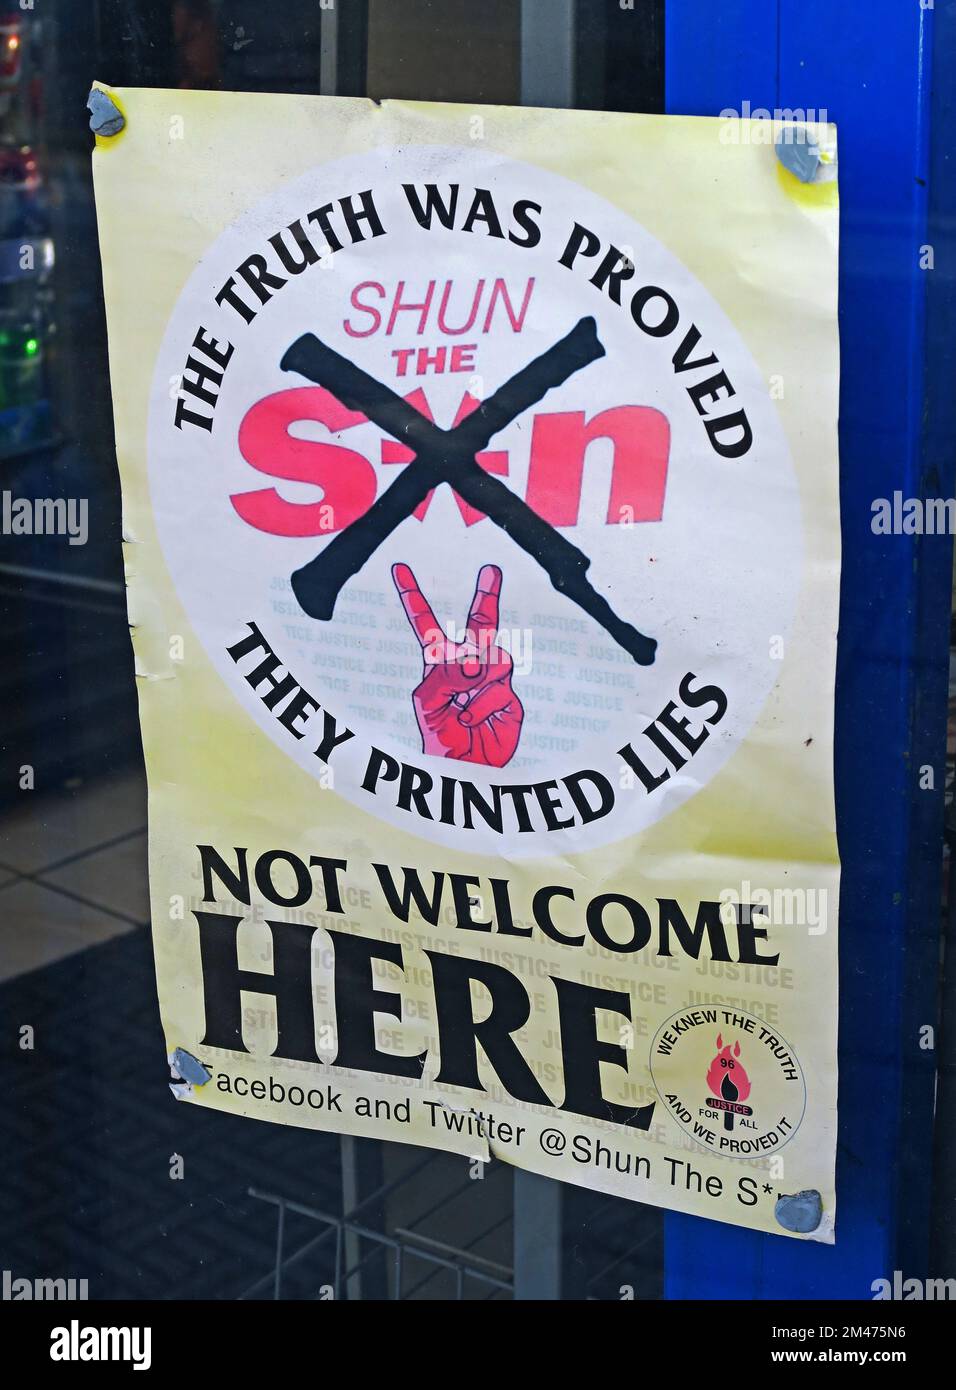 The Truth was proved,Shun the Sun, they printed lies,Not welcome Here poster, newsagent, Liverpool city centre, Merseyside, England, UK, L1 Stock Photo